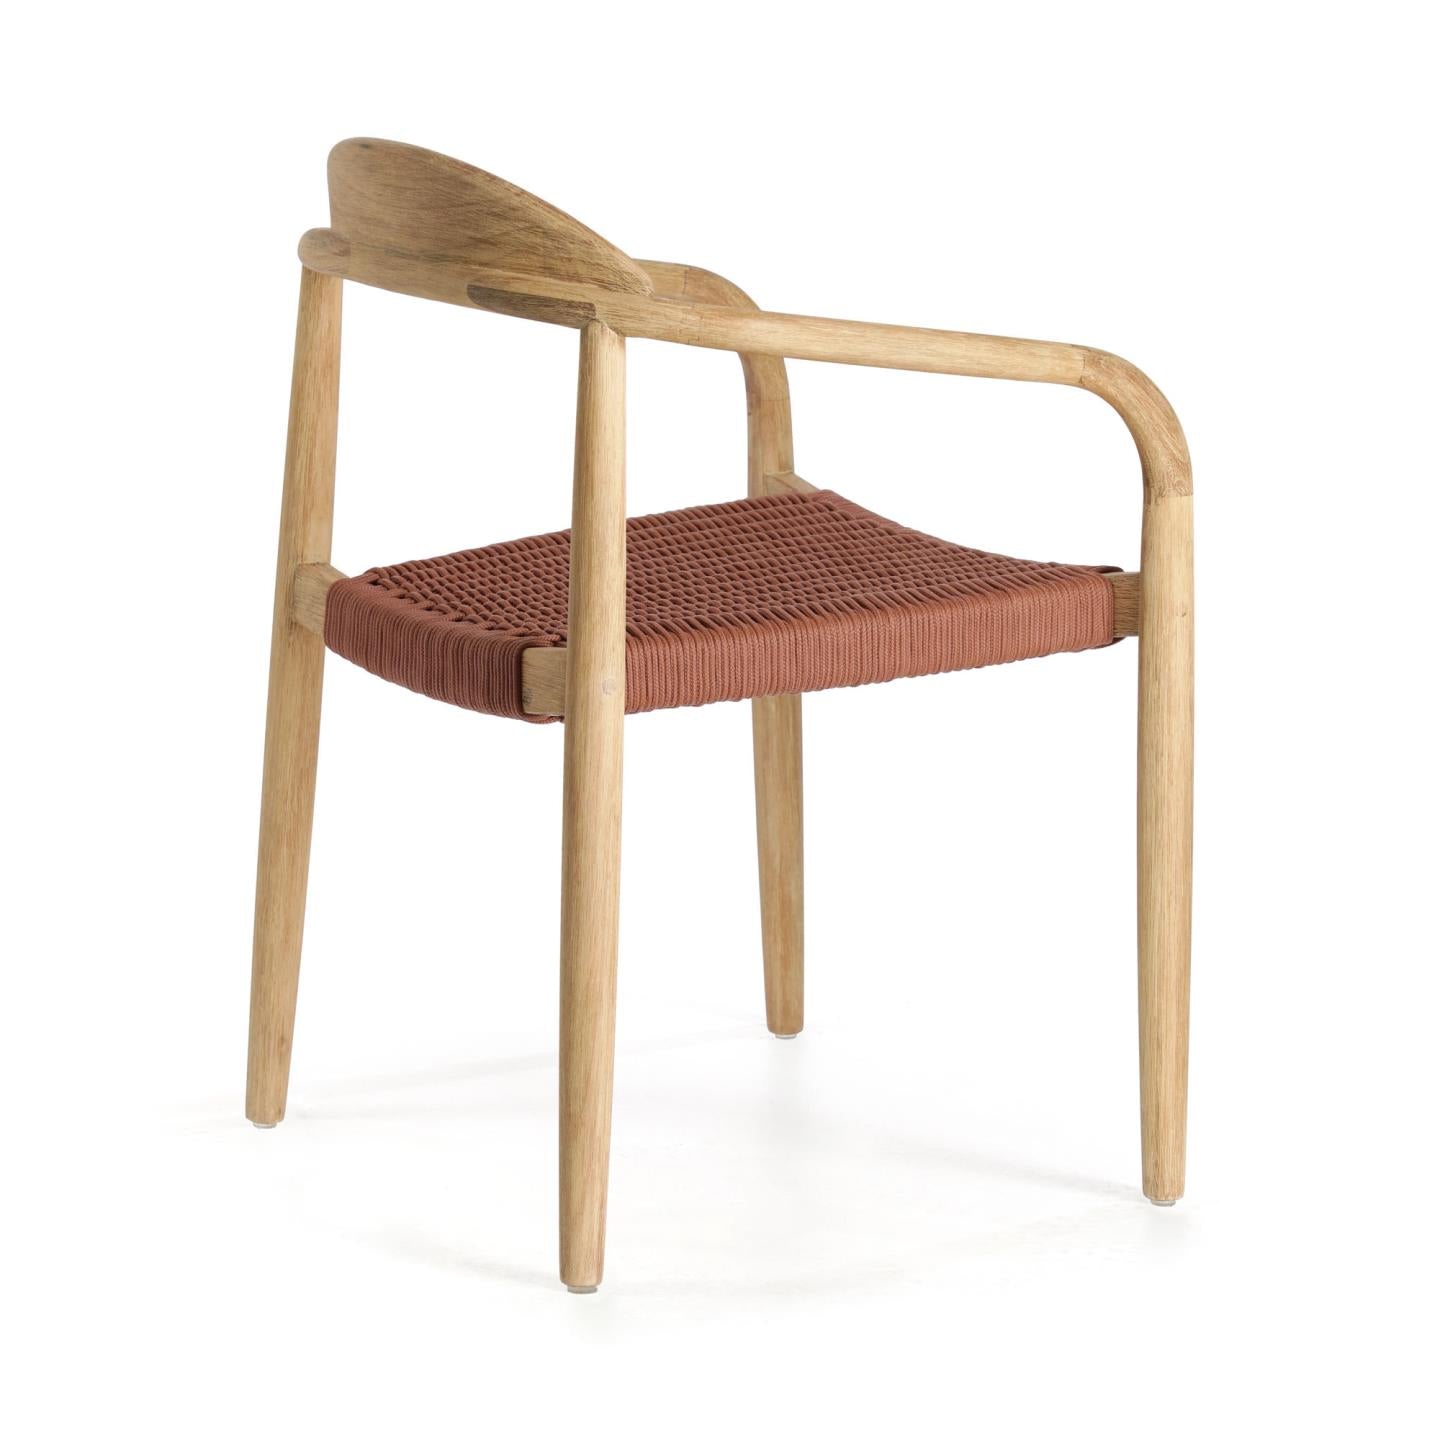 Nina stackable chair in solid acacia wood and terracotta rope seat